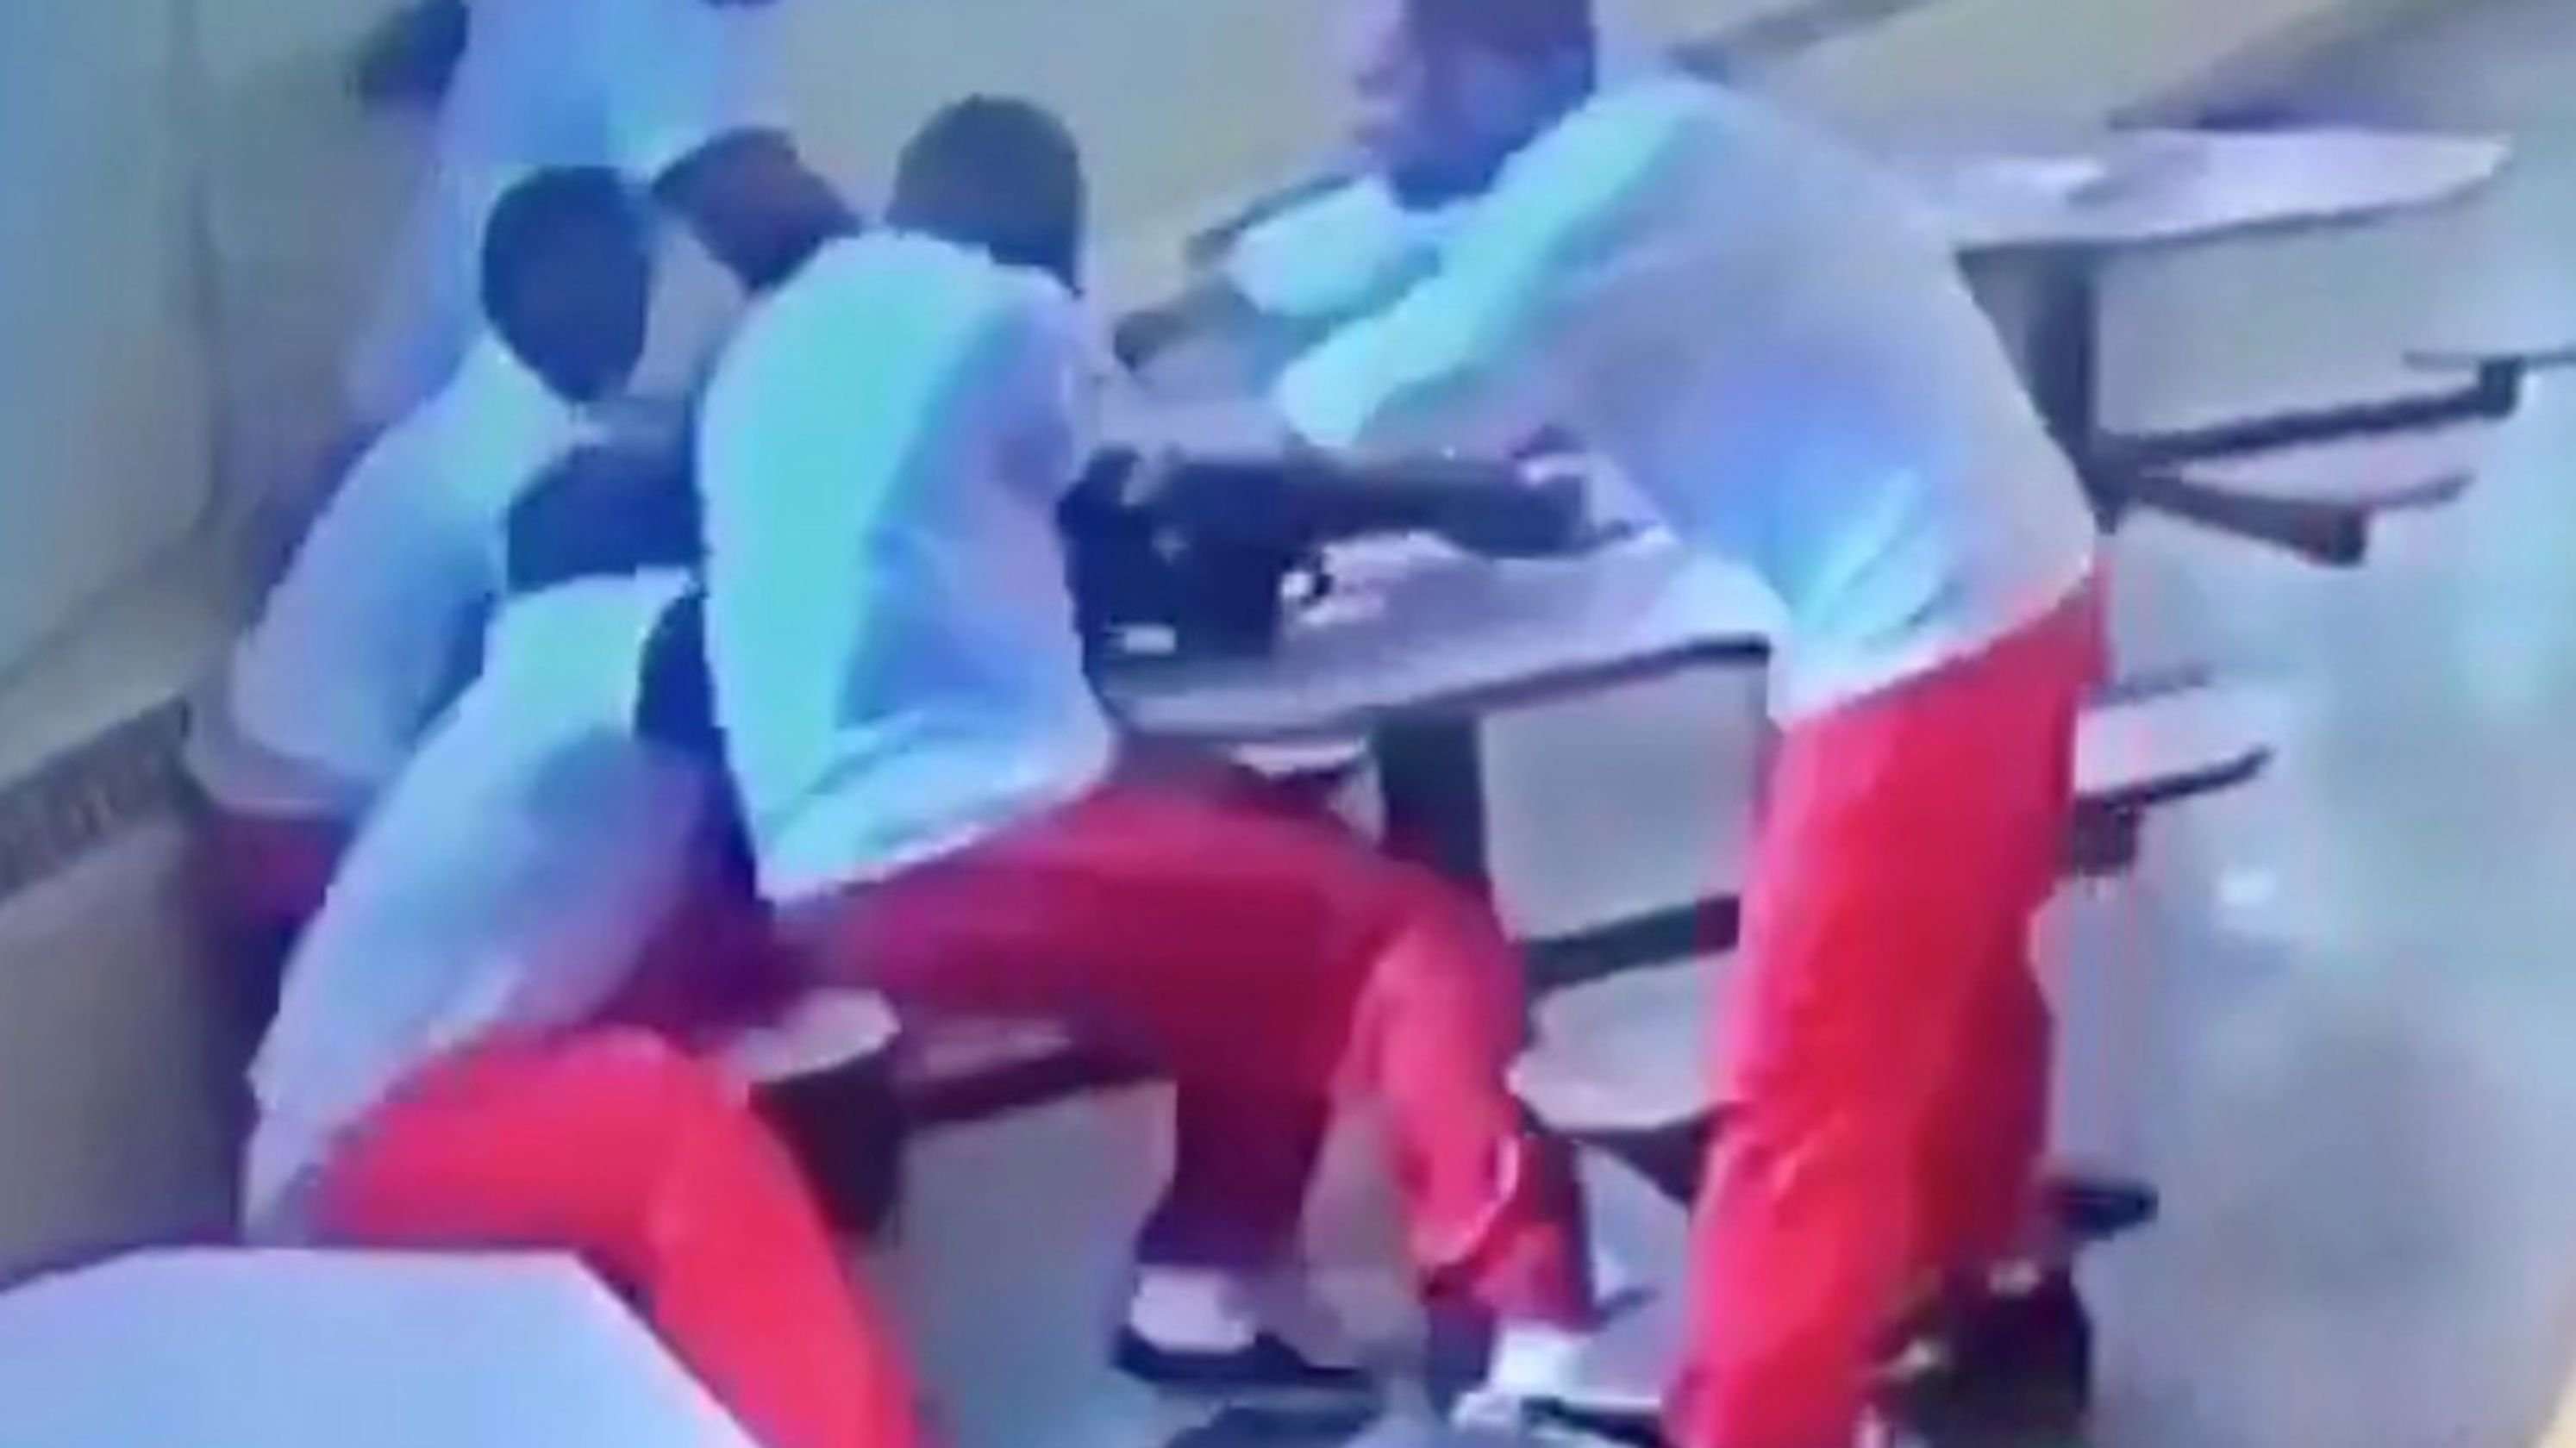 image for Ohio guards laughed as supremacist stabbed cuffed black inmates, suit says